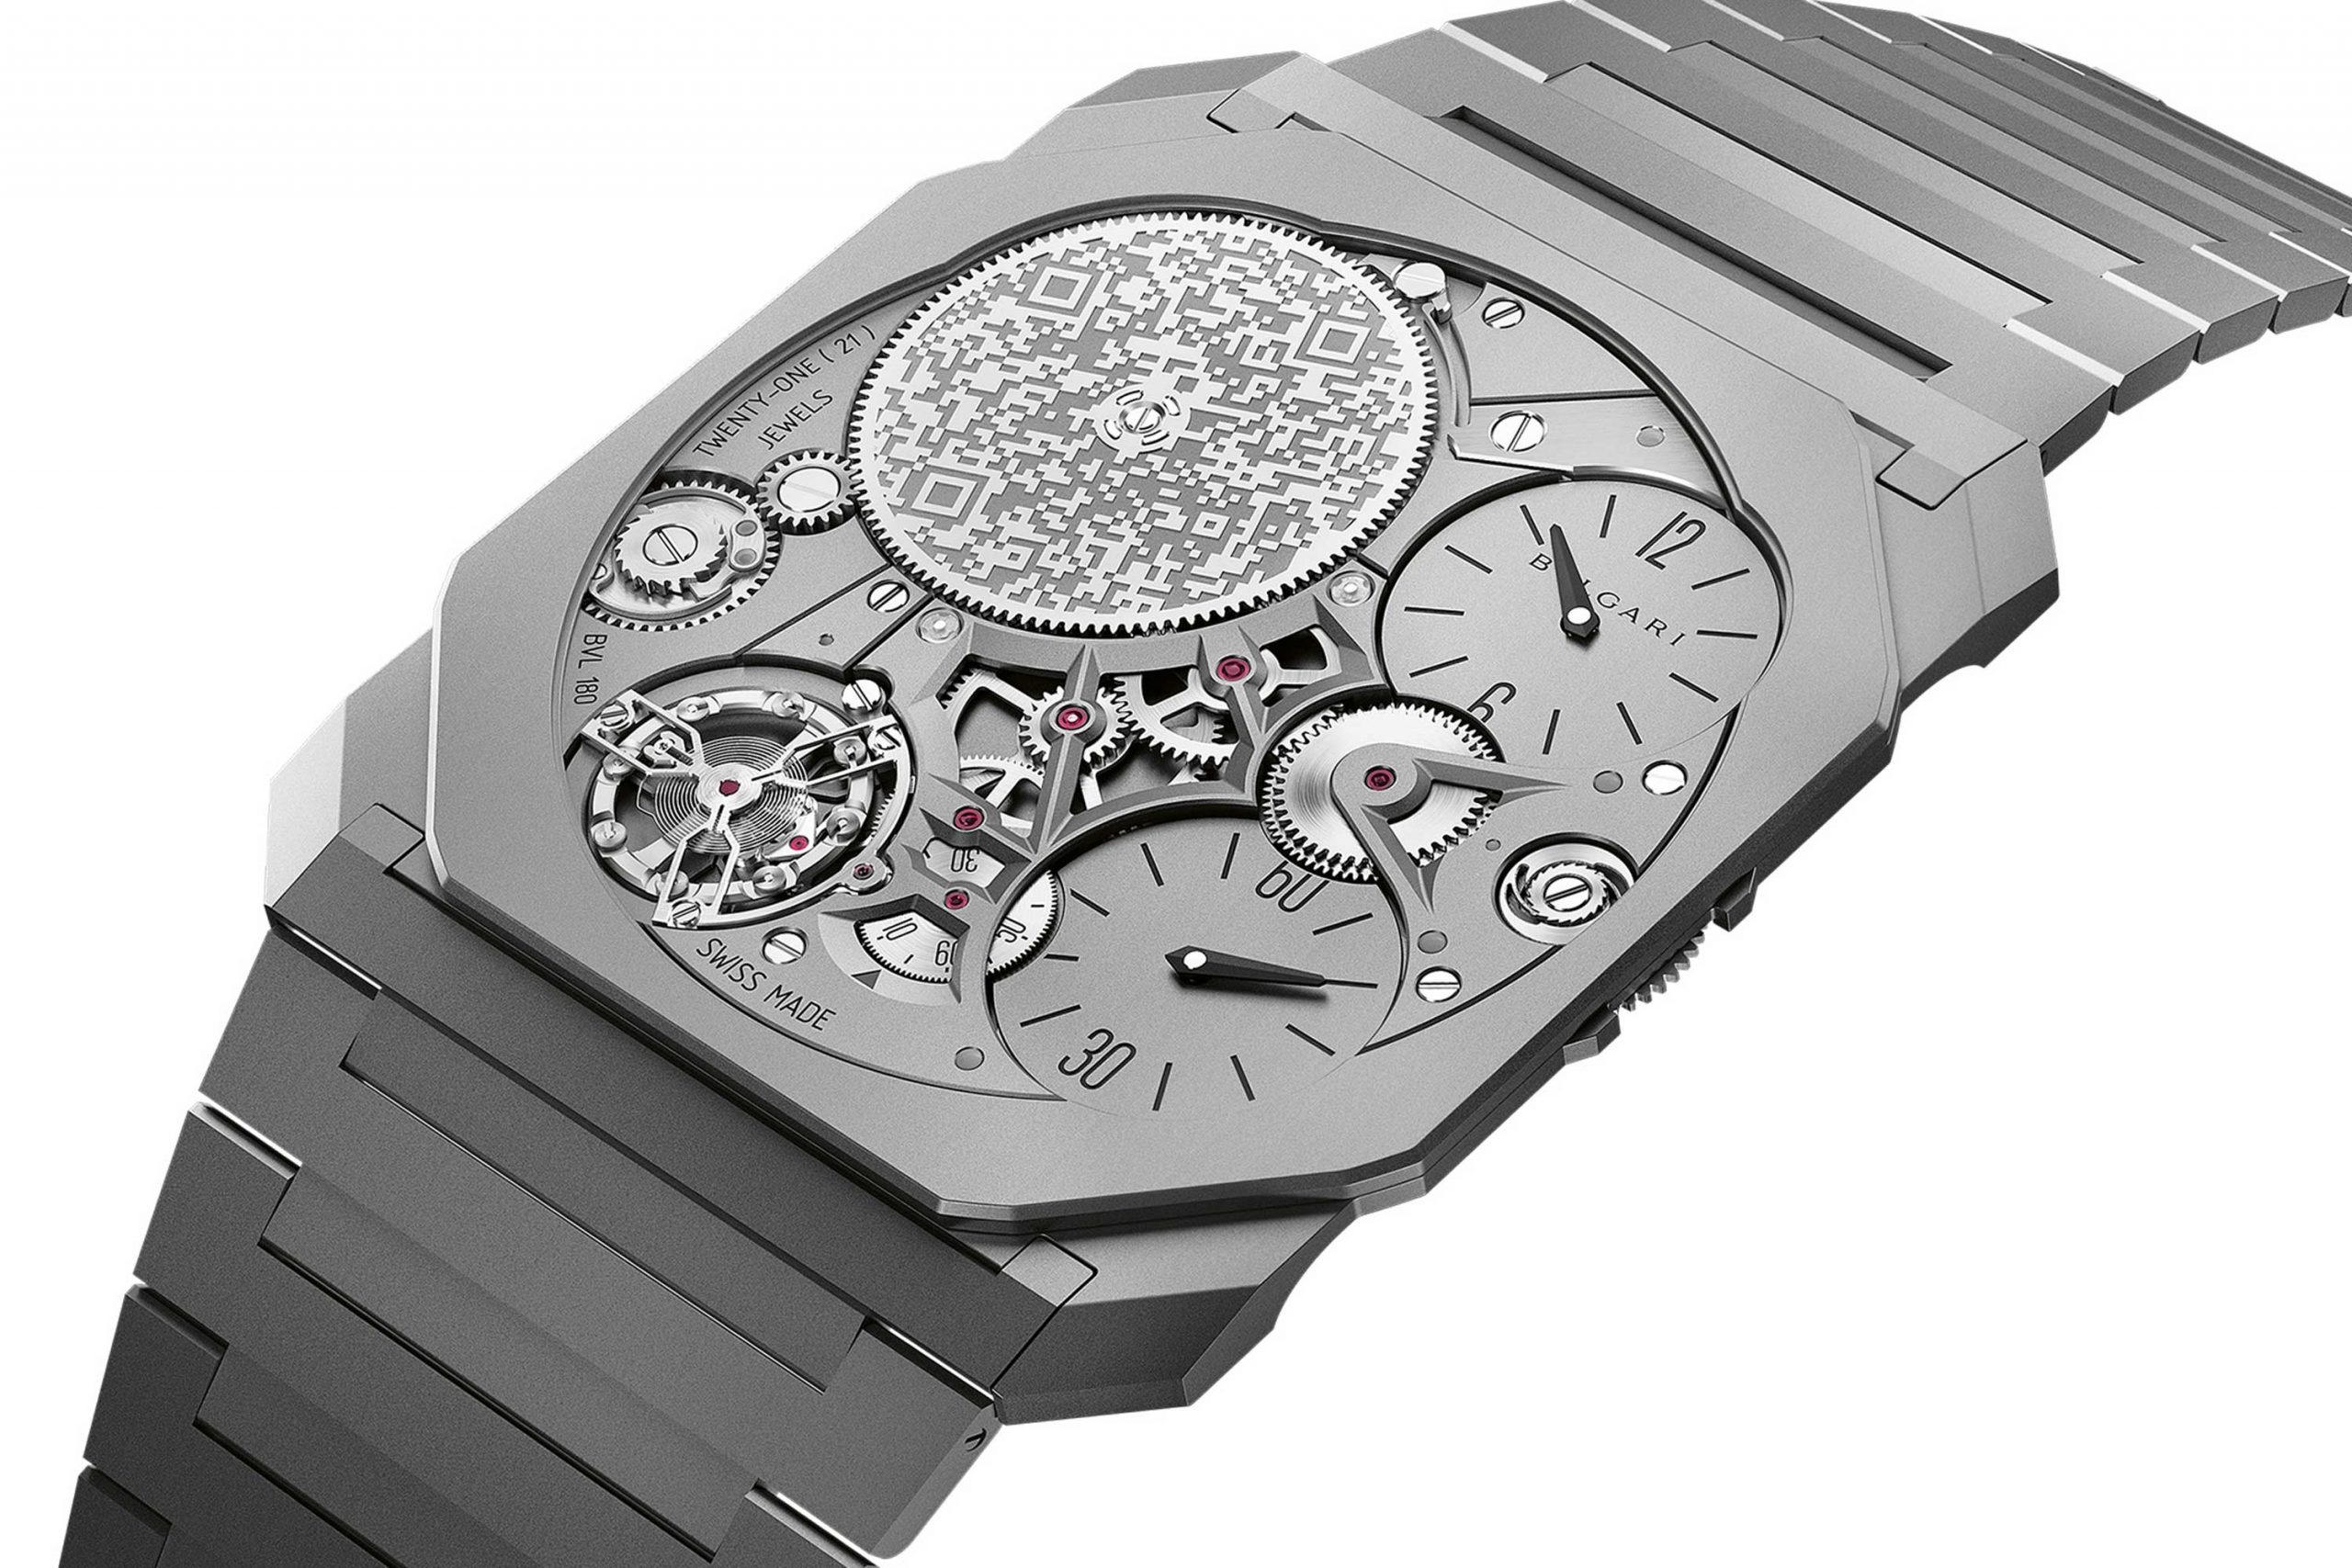 A dynamic contrast between the muscular presence from the front of the watch and its slim elegance from the side